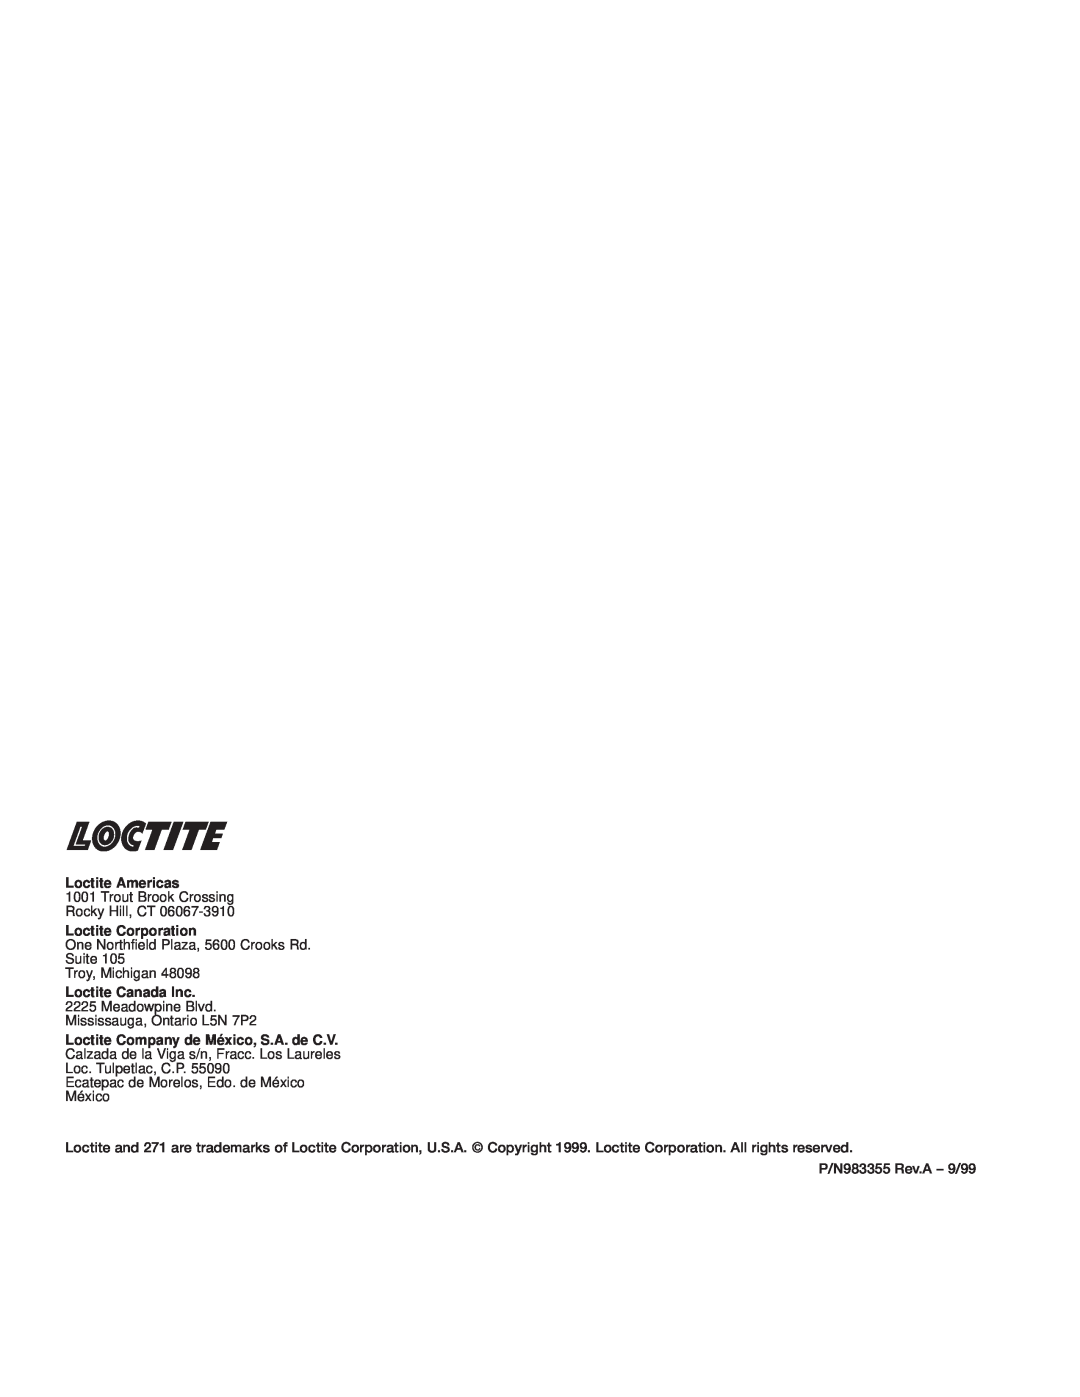 Henkel 9000 Loctite Americas, Trout Brook Crossing Rocky Hill, CT, Loctite Corporation, Troy, Michigan, Loctite Canada Inc 